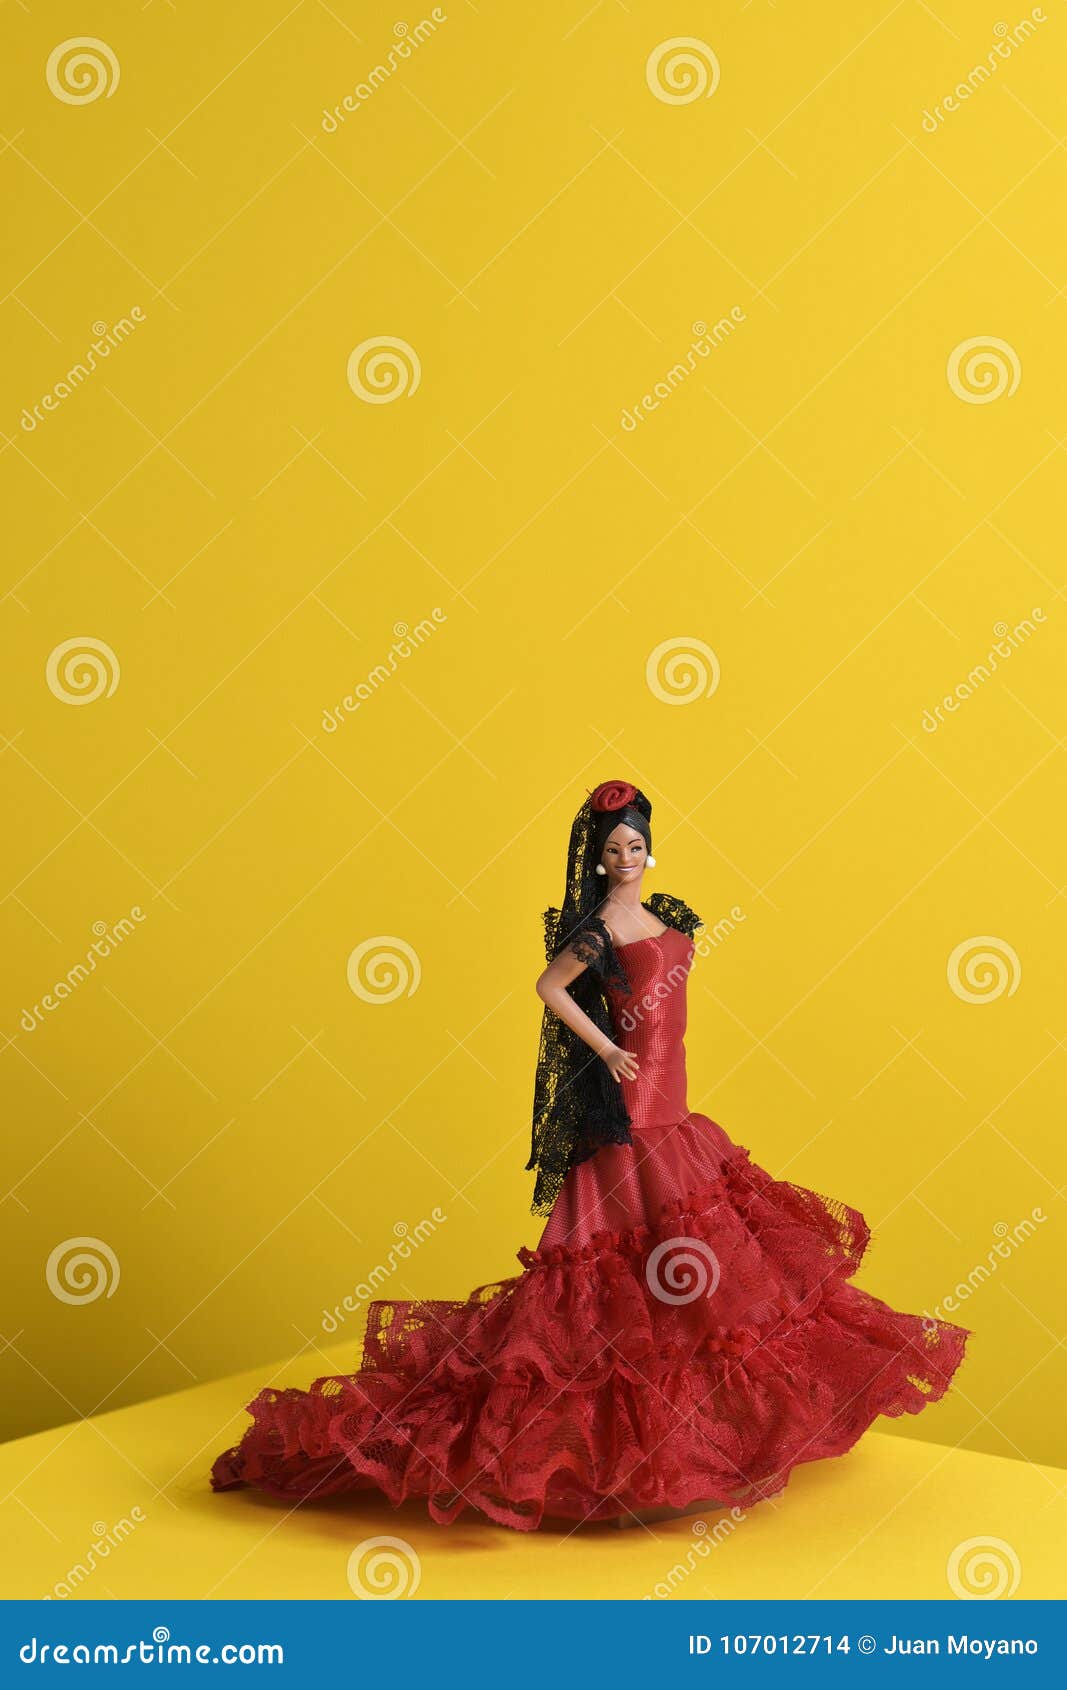 spanish doll dressed as a typical flamenco dancer